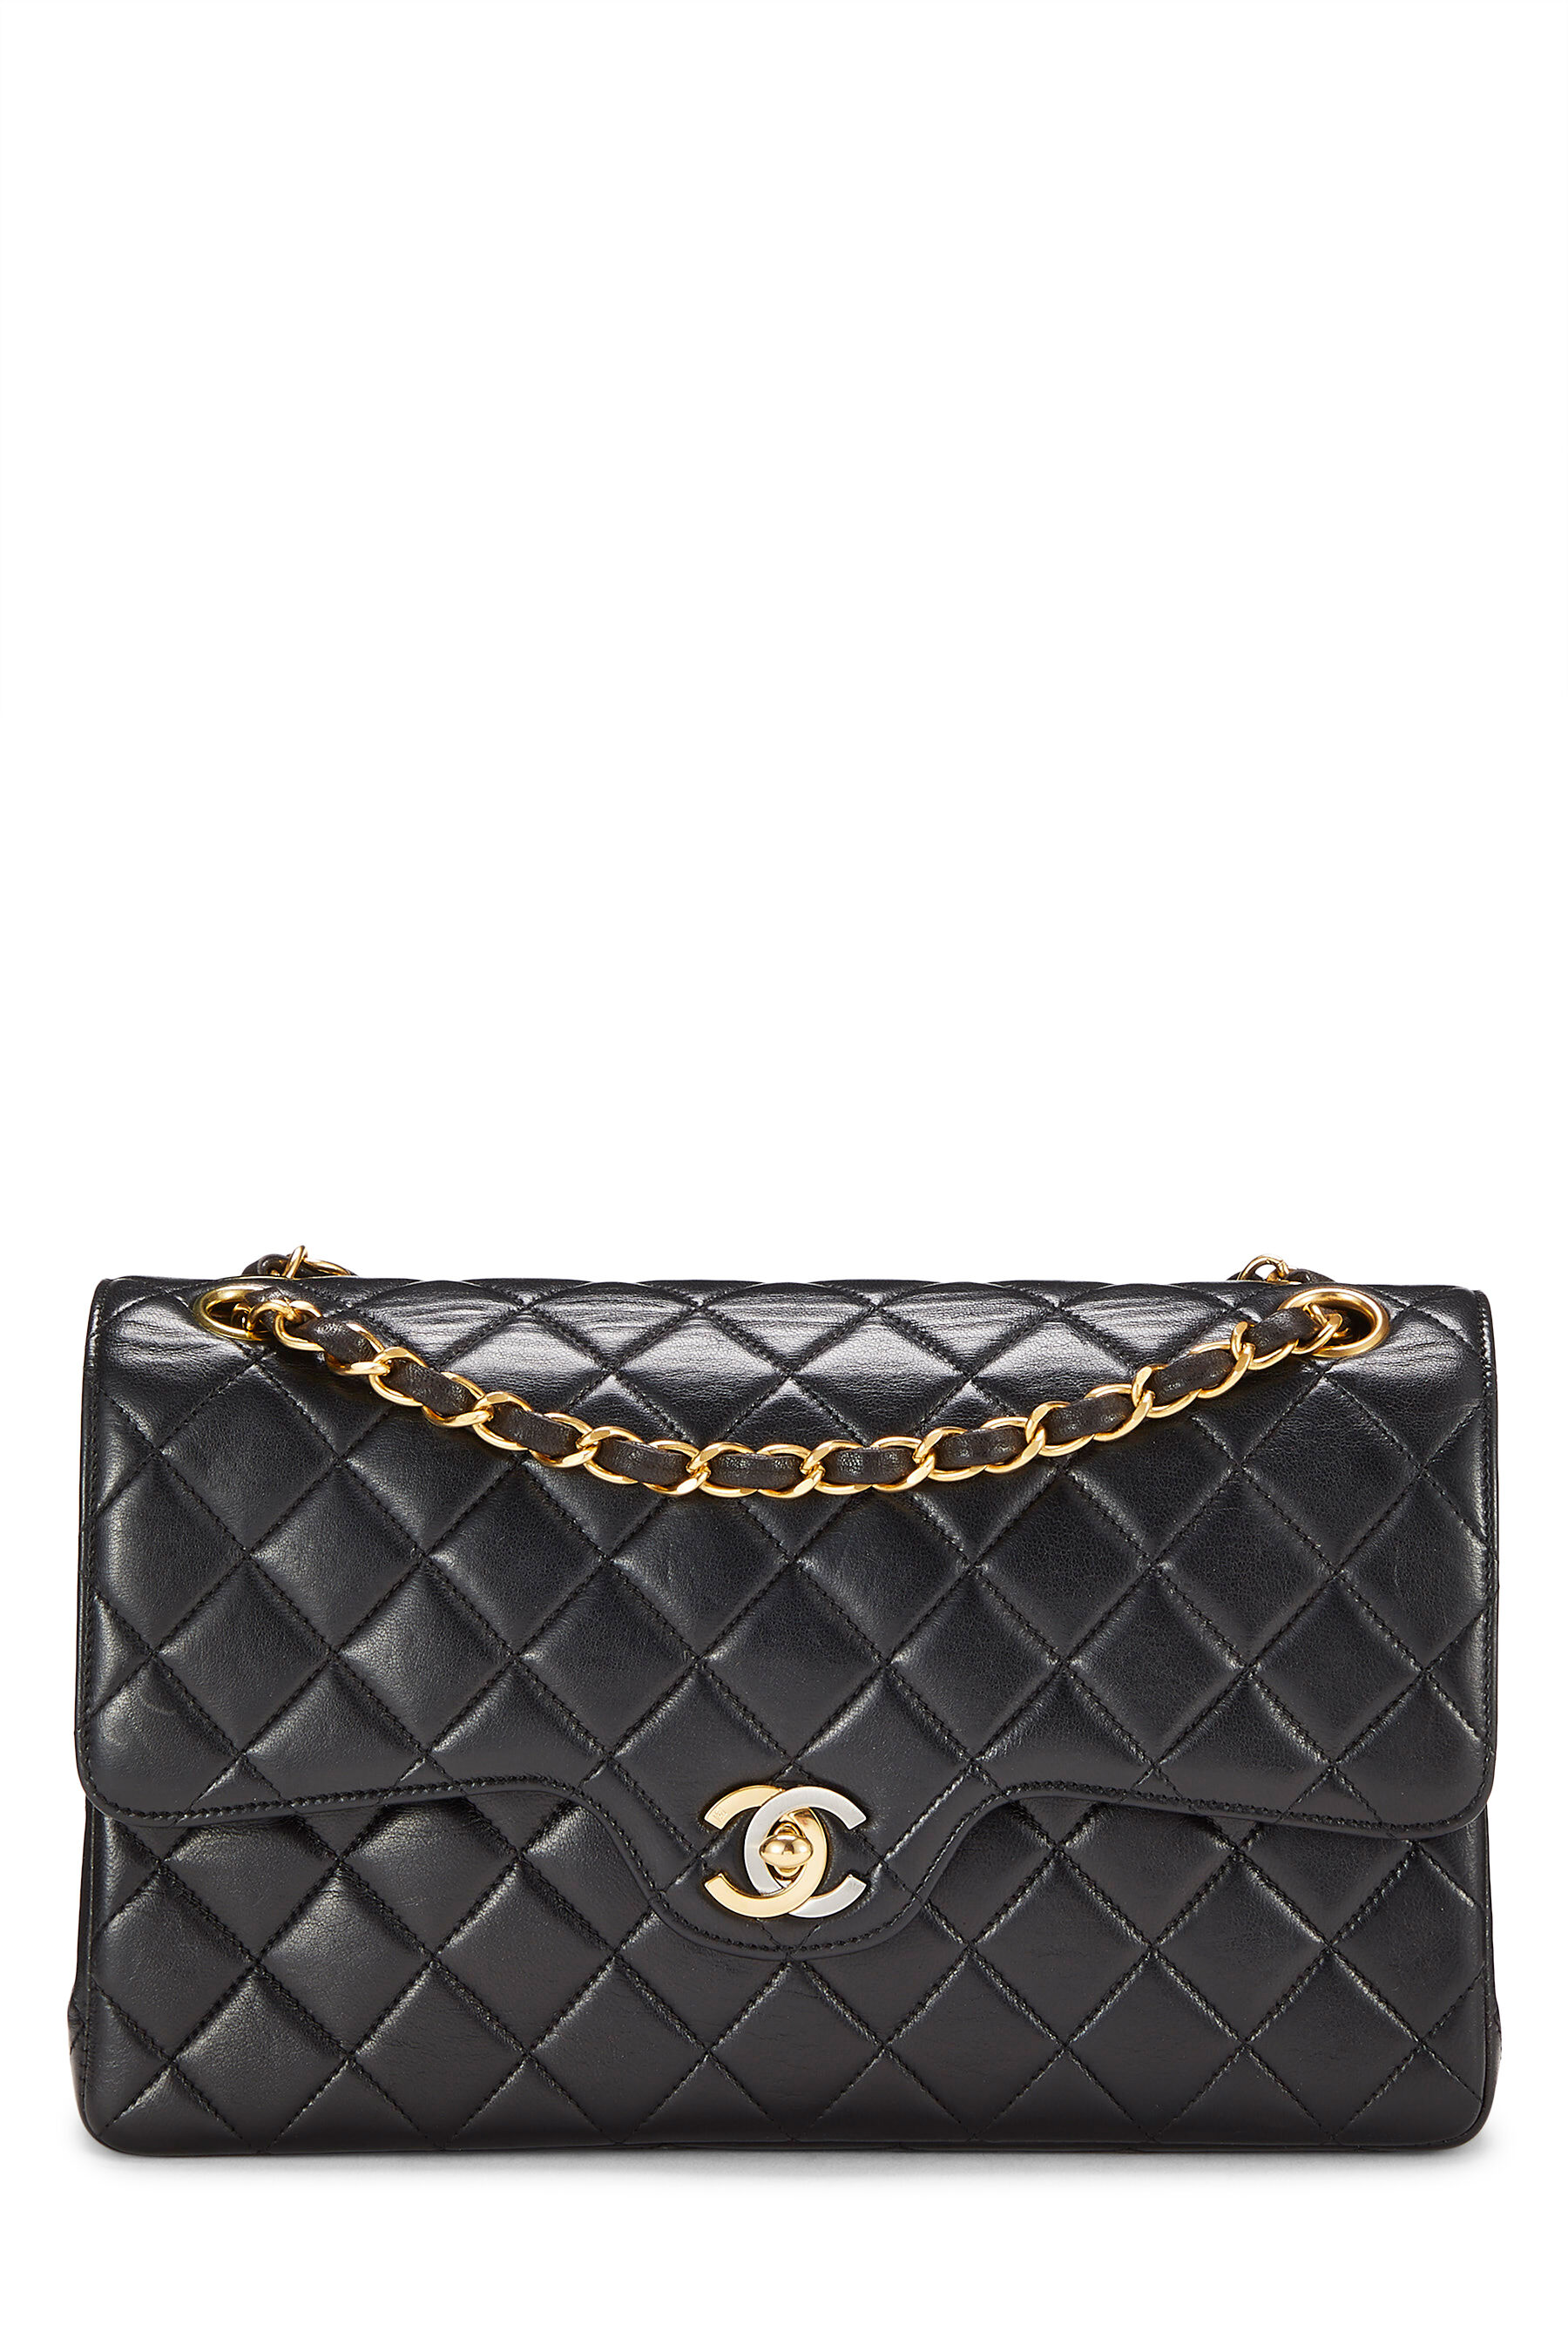 Chanel - Black Quilted Lambskin Paris Limited Double Flap Medium